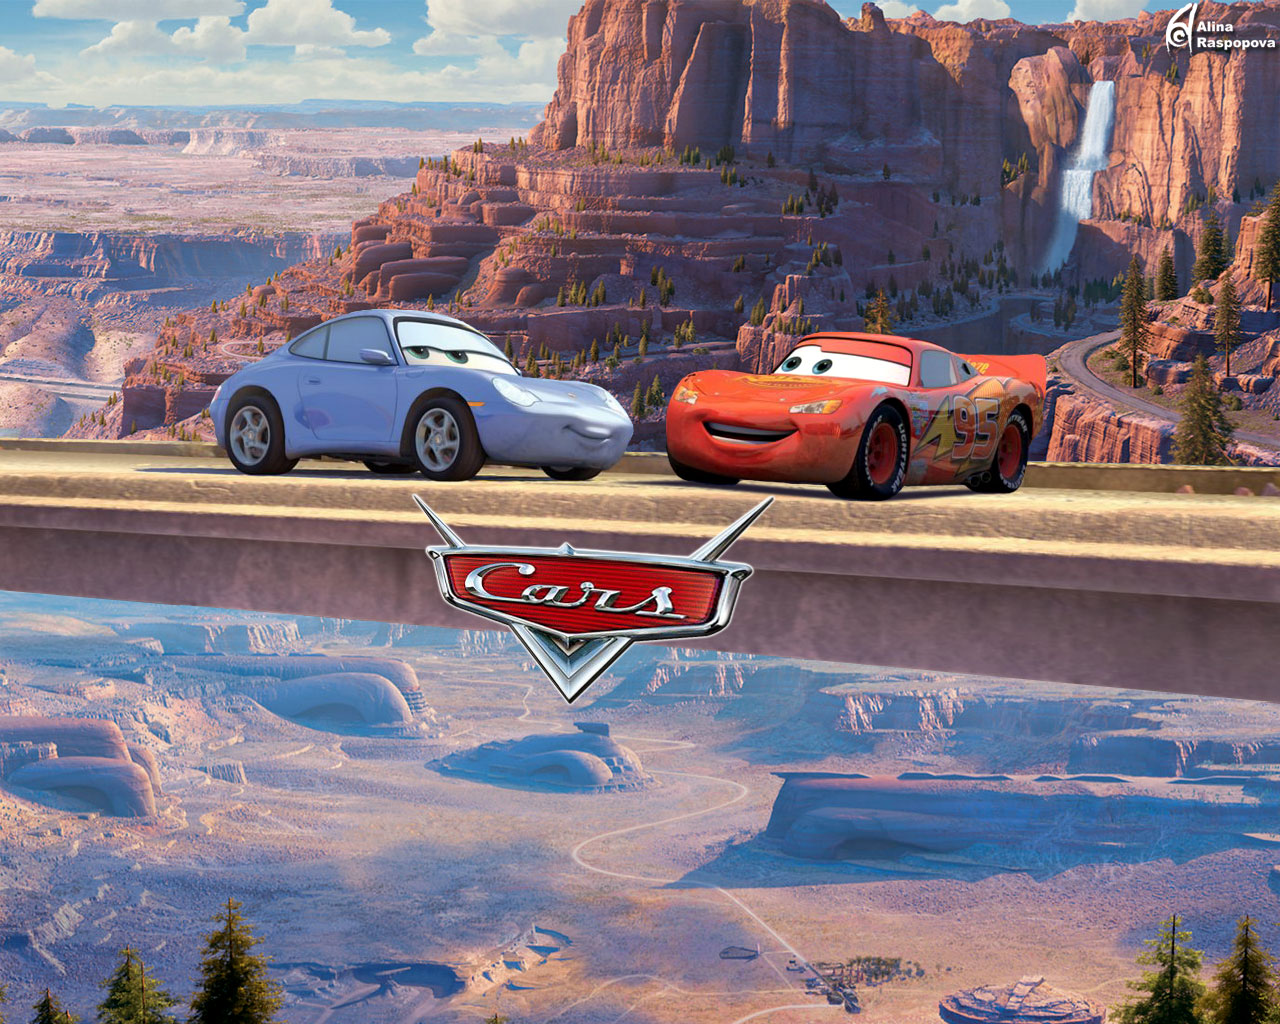 1024 X 819 Cars Movie Wallpaper - Grand Canyon Cars Movie , HD Wallpaper & Backgrounds